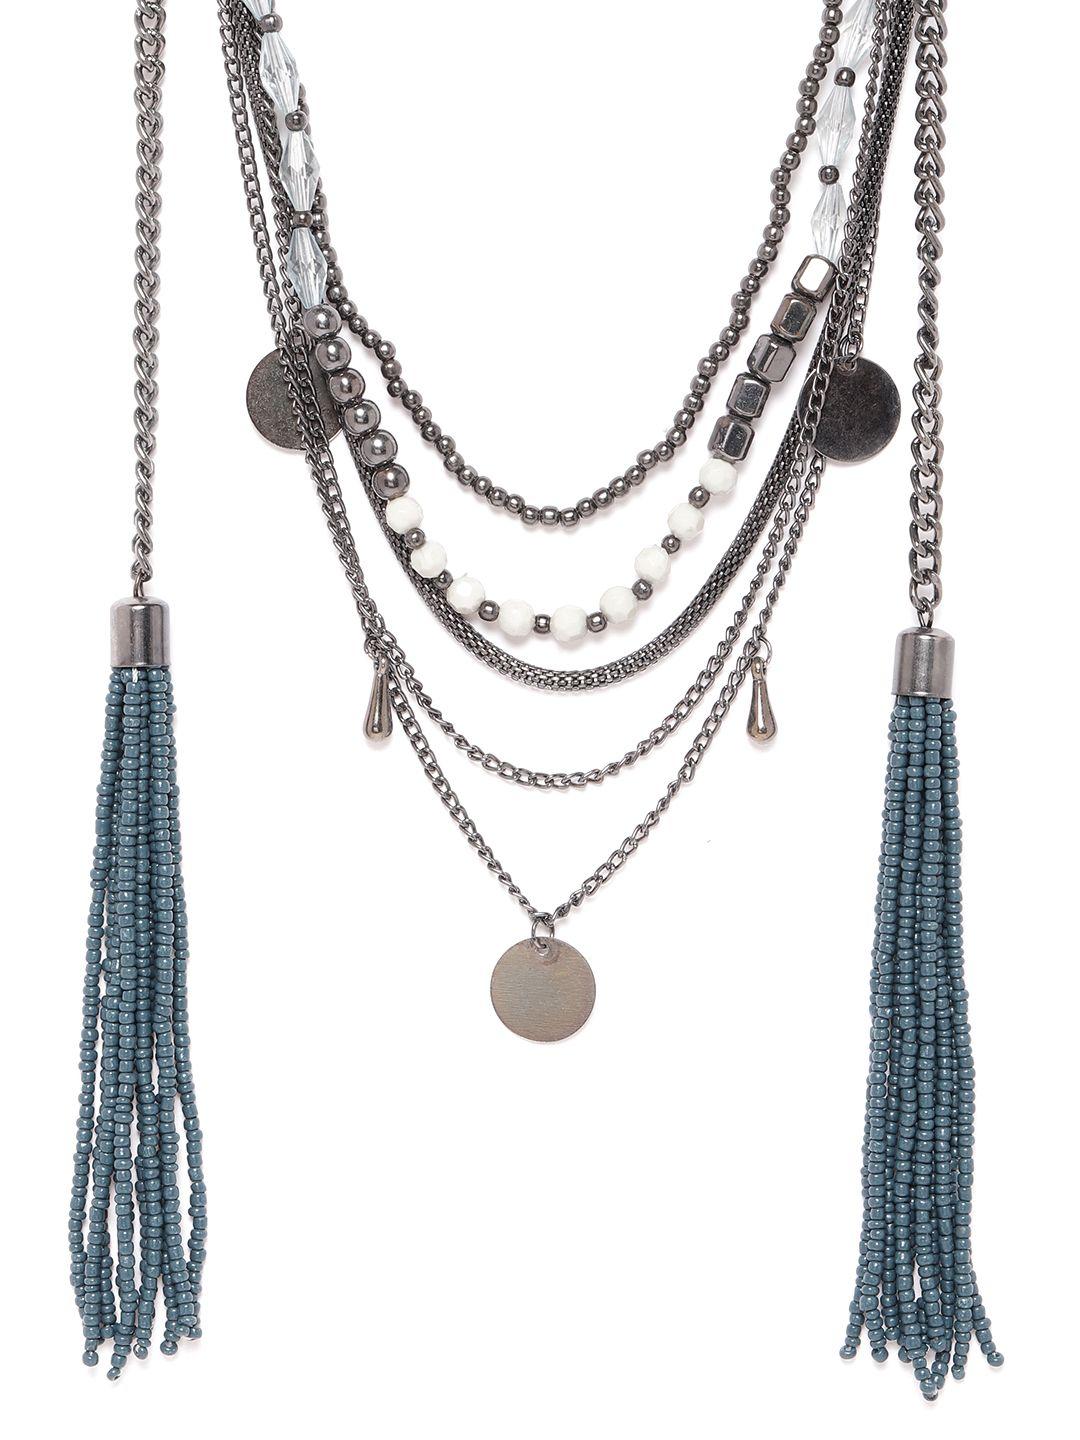 richeera women oxidised teal blue & silver-toned beaded layered & tasselled necklace